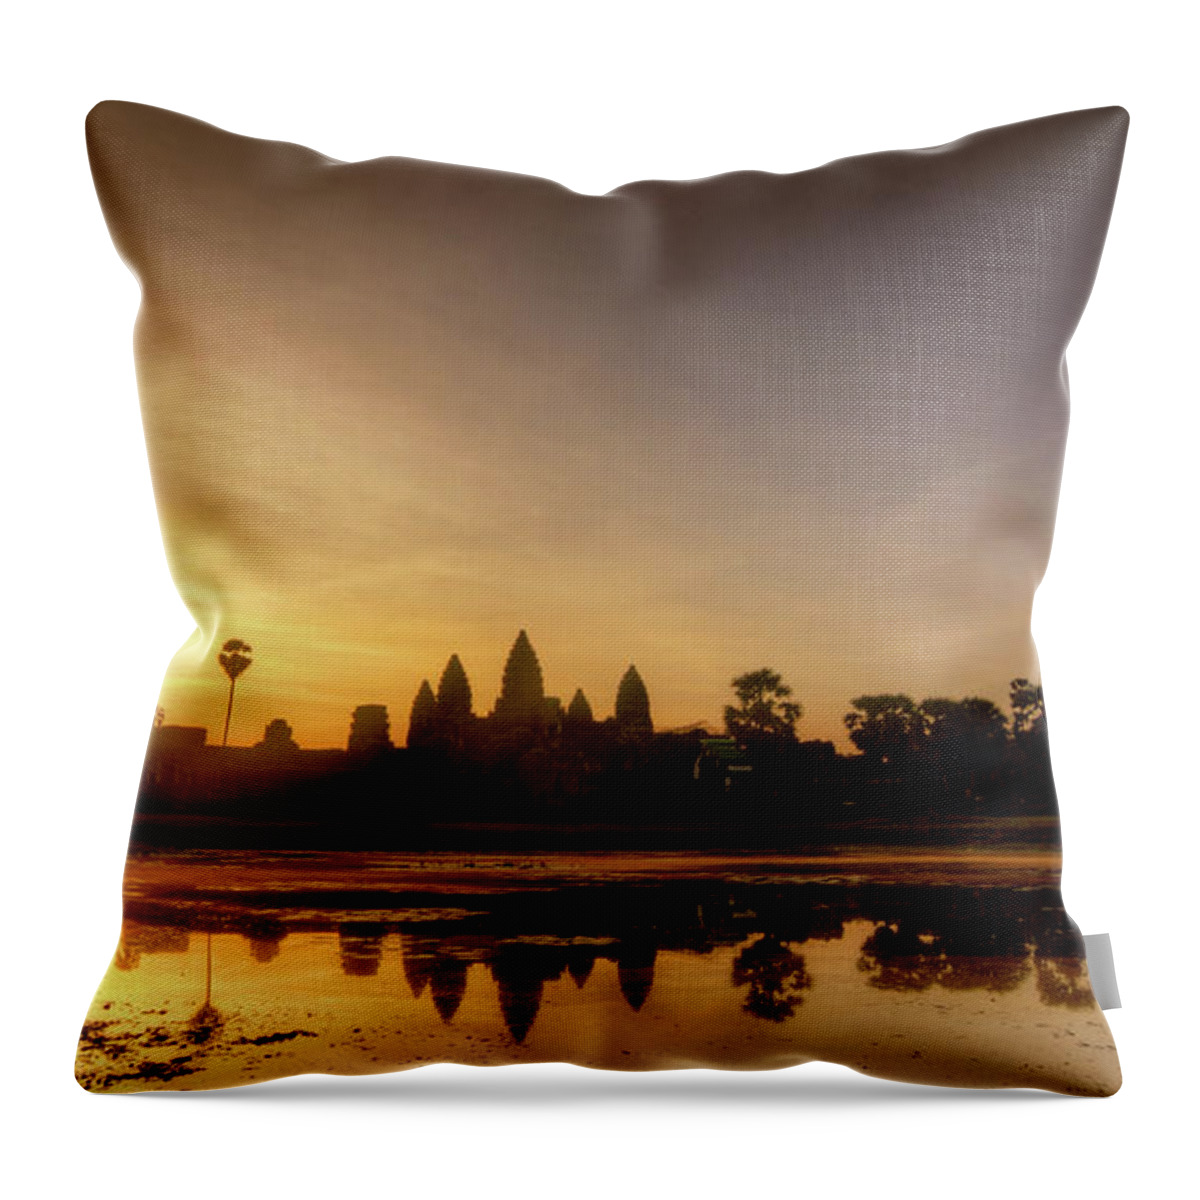 Standing Water Throw Pillow featuring the photograph Golden Reflections by Photo By Dan Goldberger